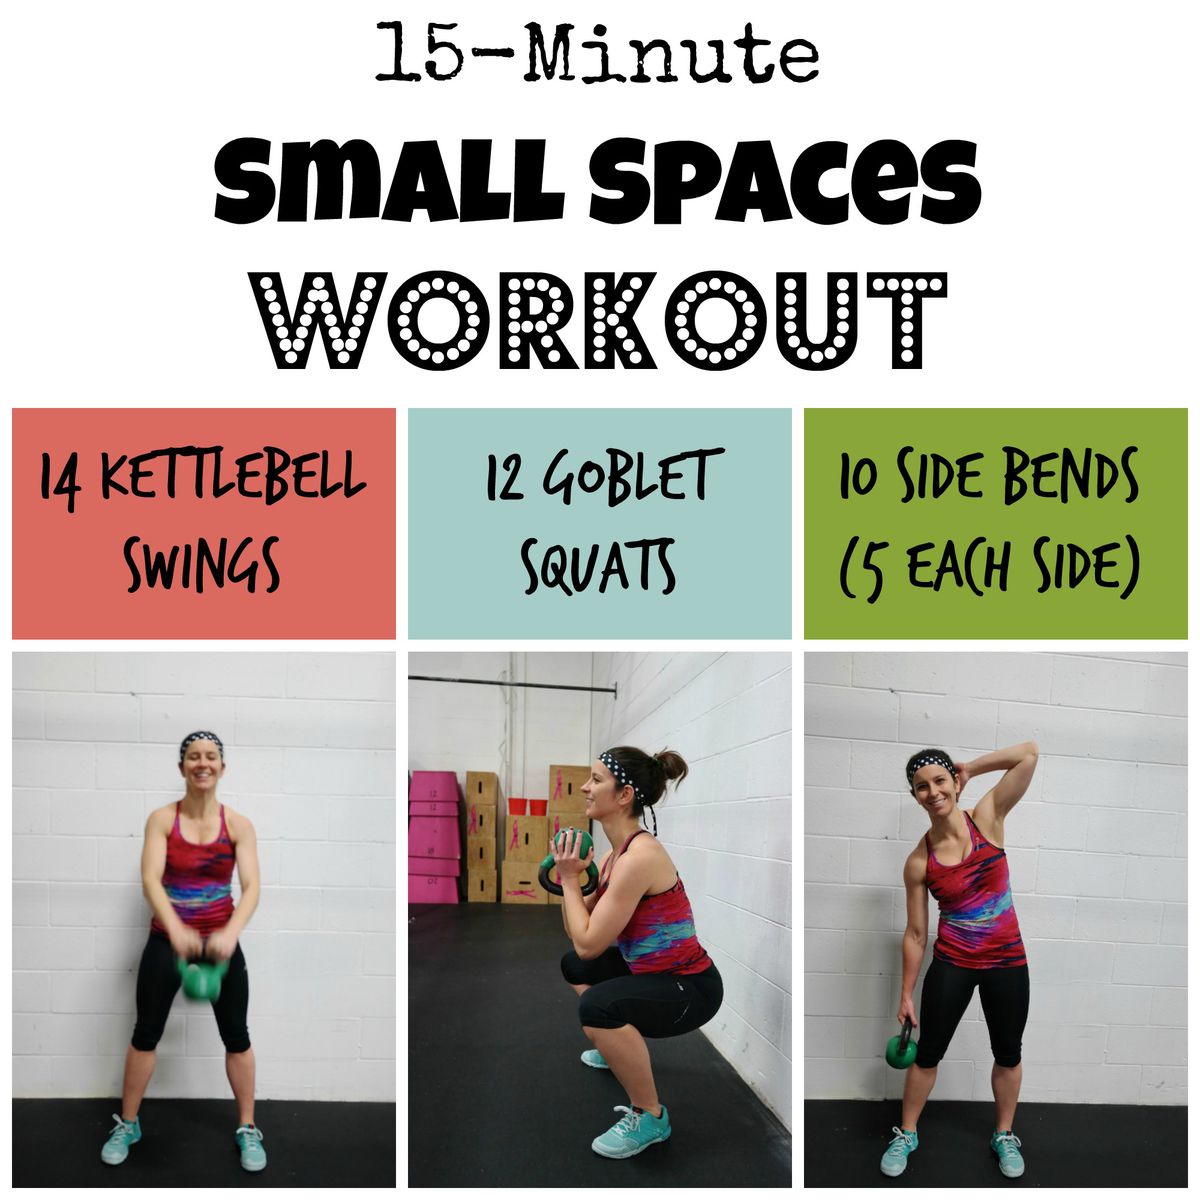 15-minute-small-spaces-workout.jpg